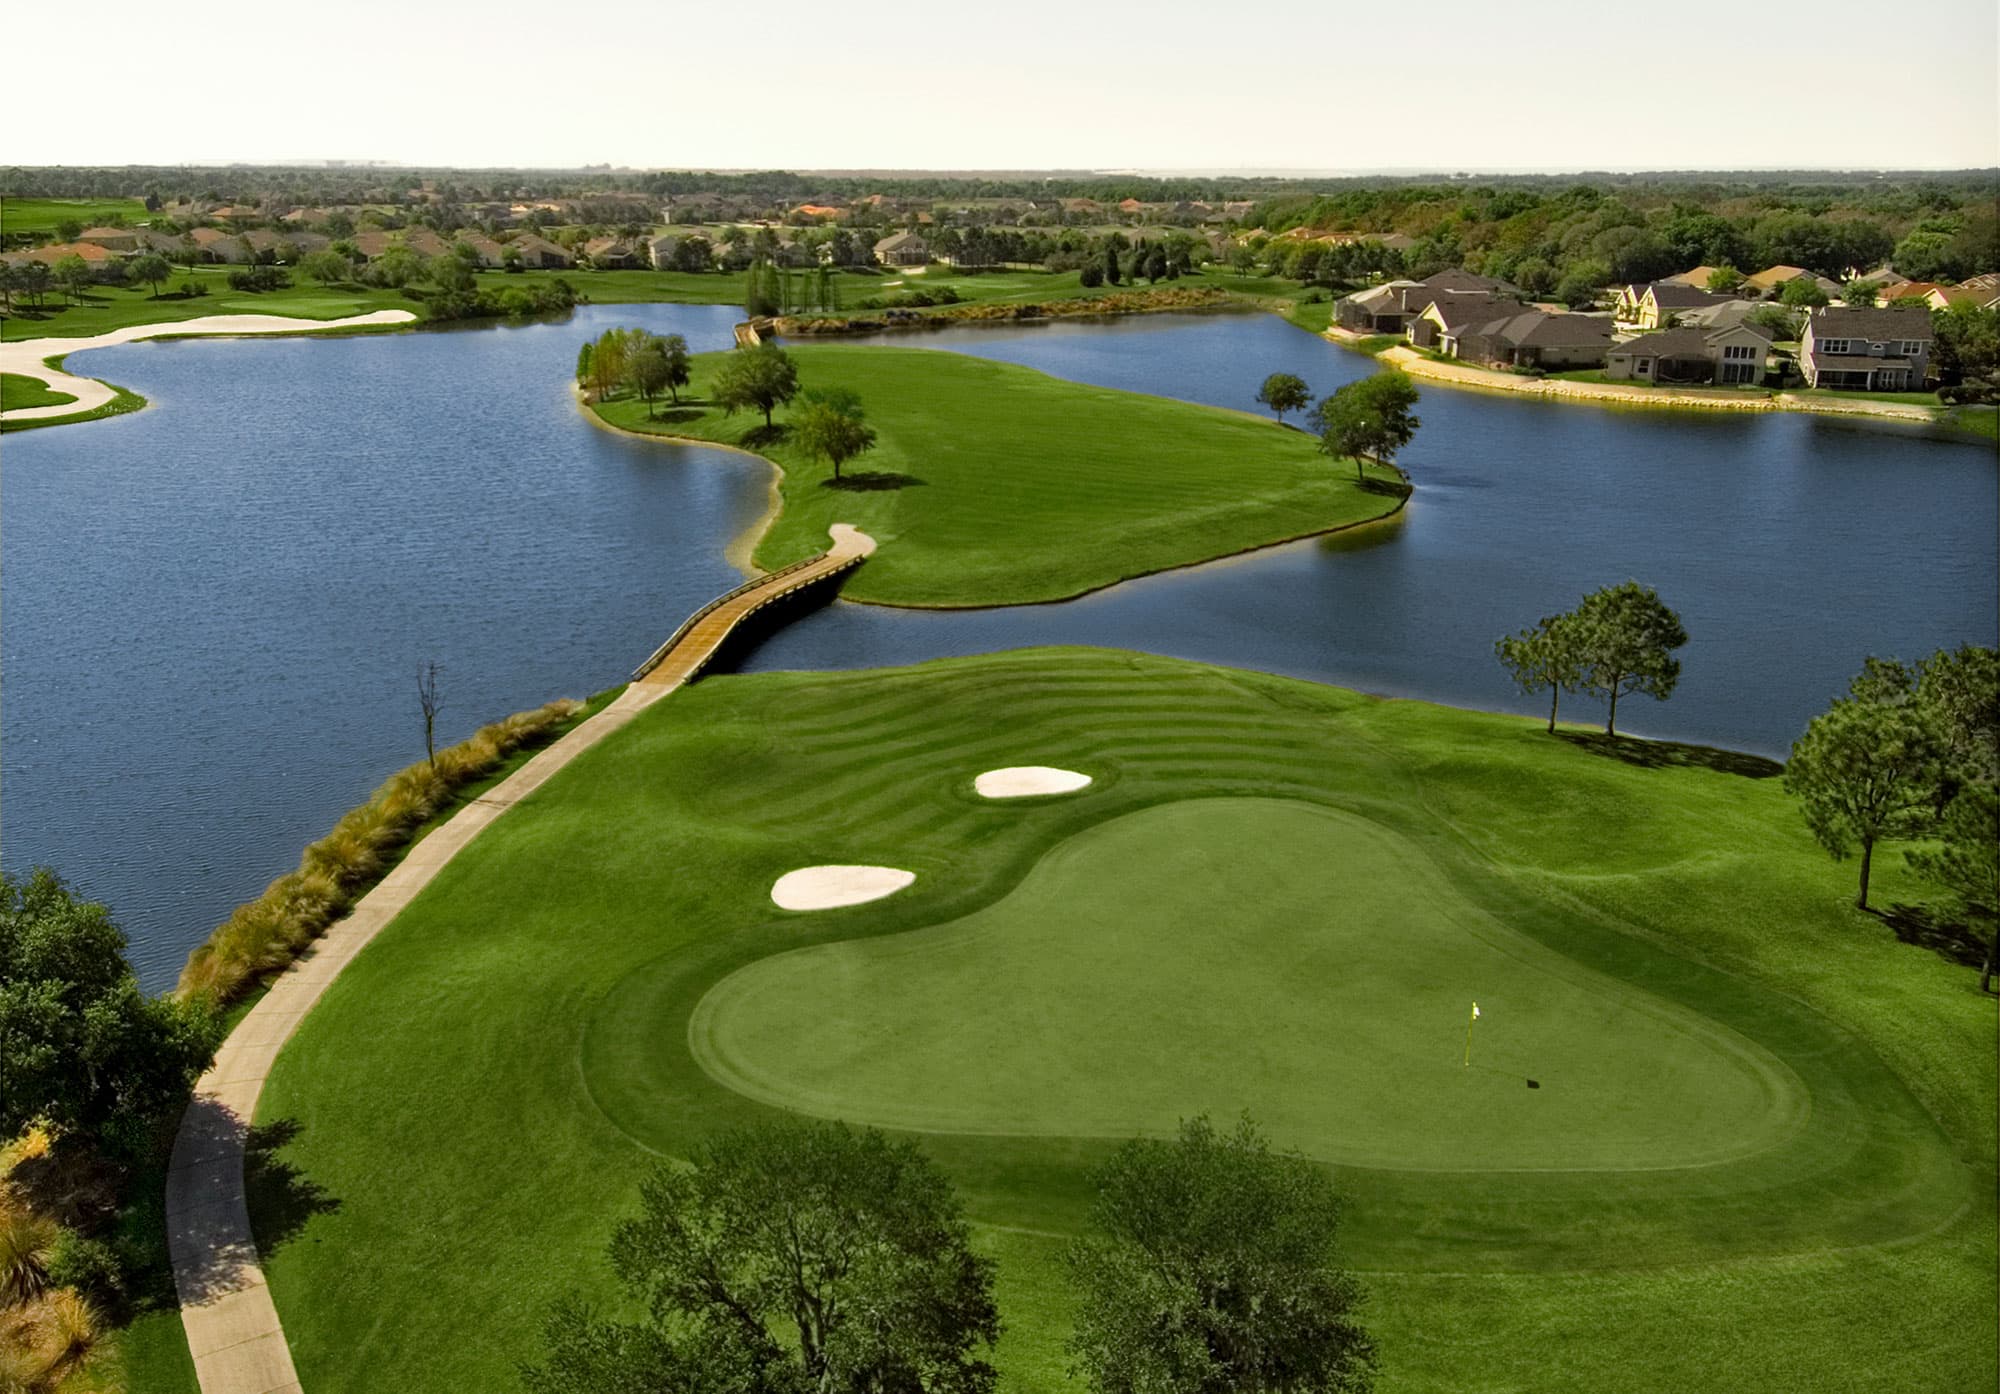 Par 3 hole featuring over the water shot to tee at Eaglebrooke Golf & Country Club in Lakeland, FL